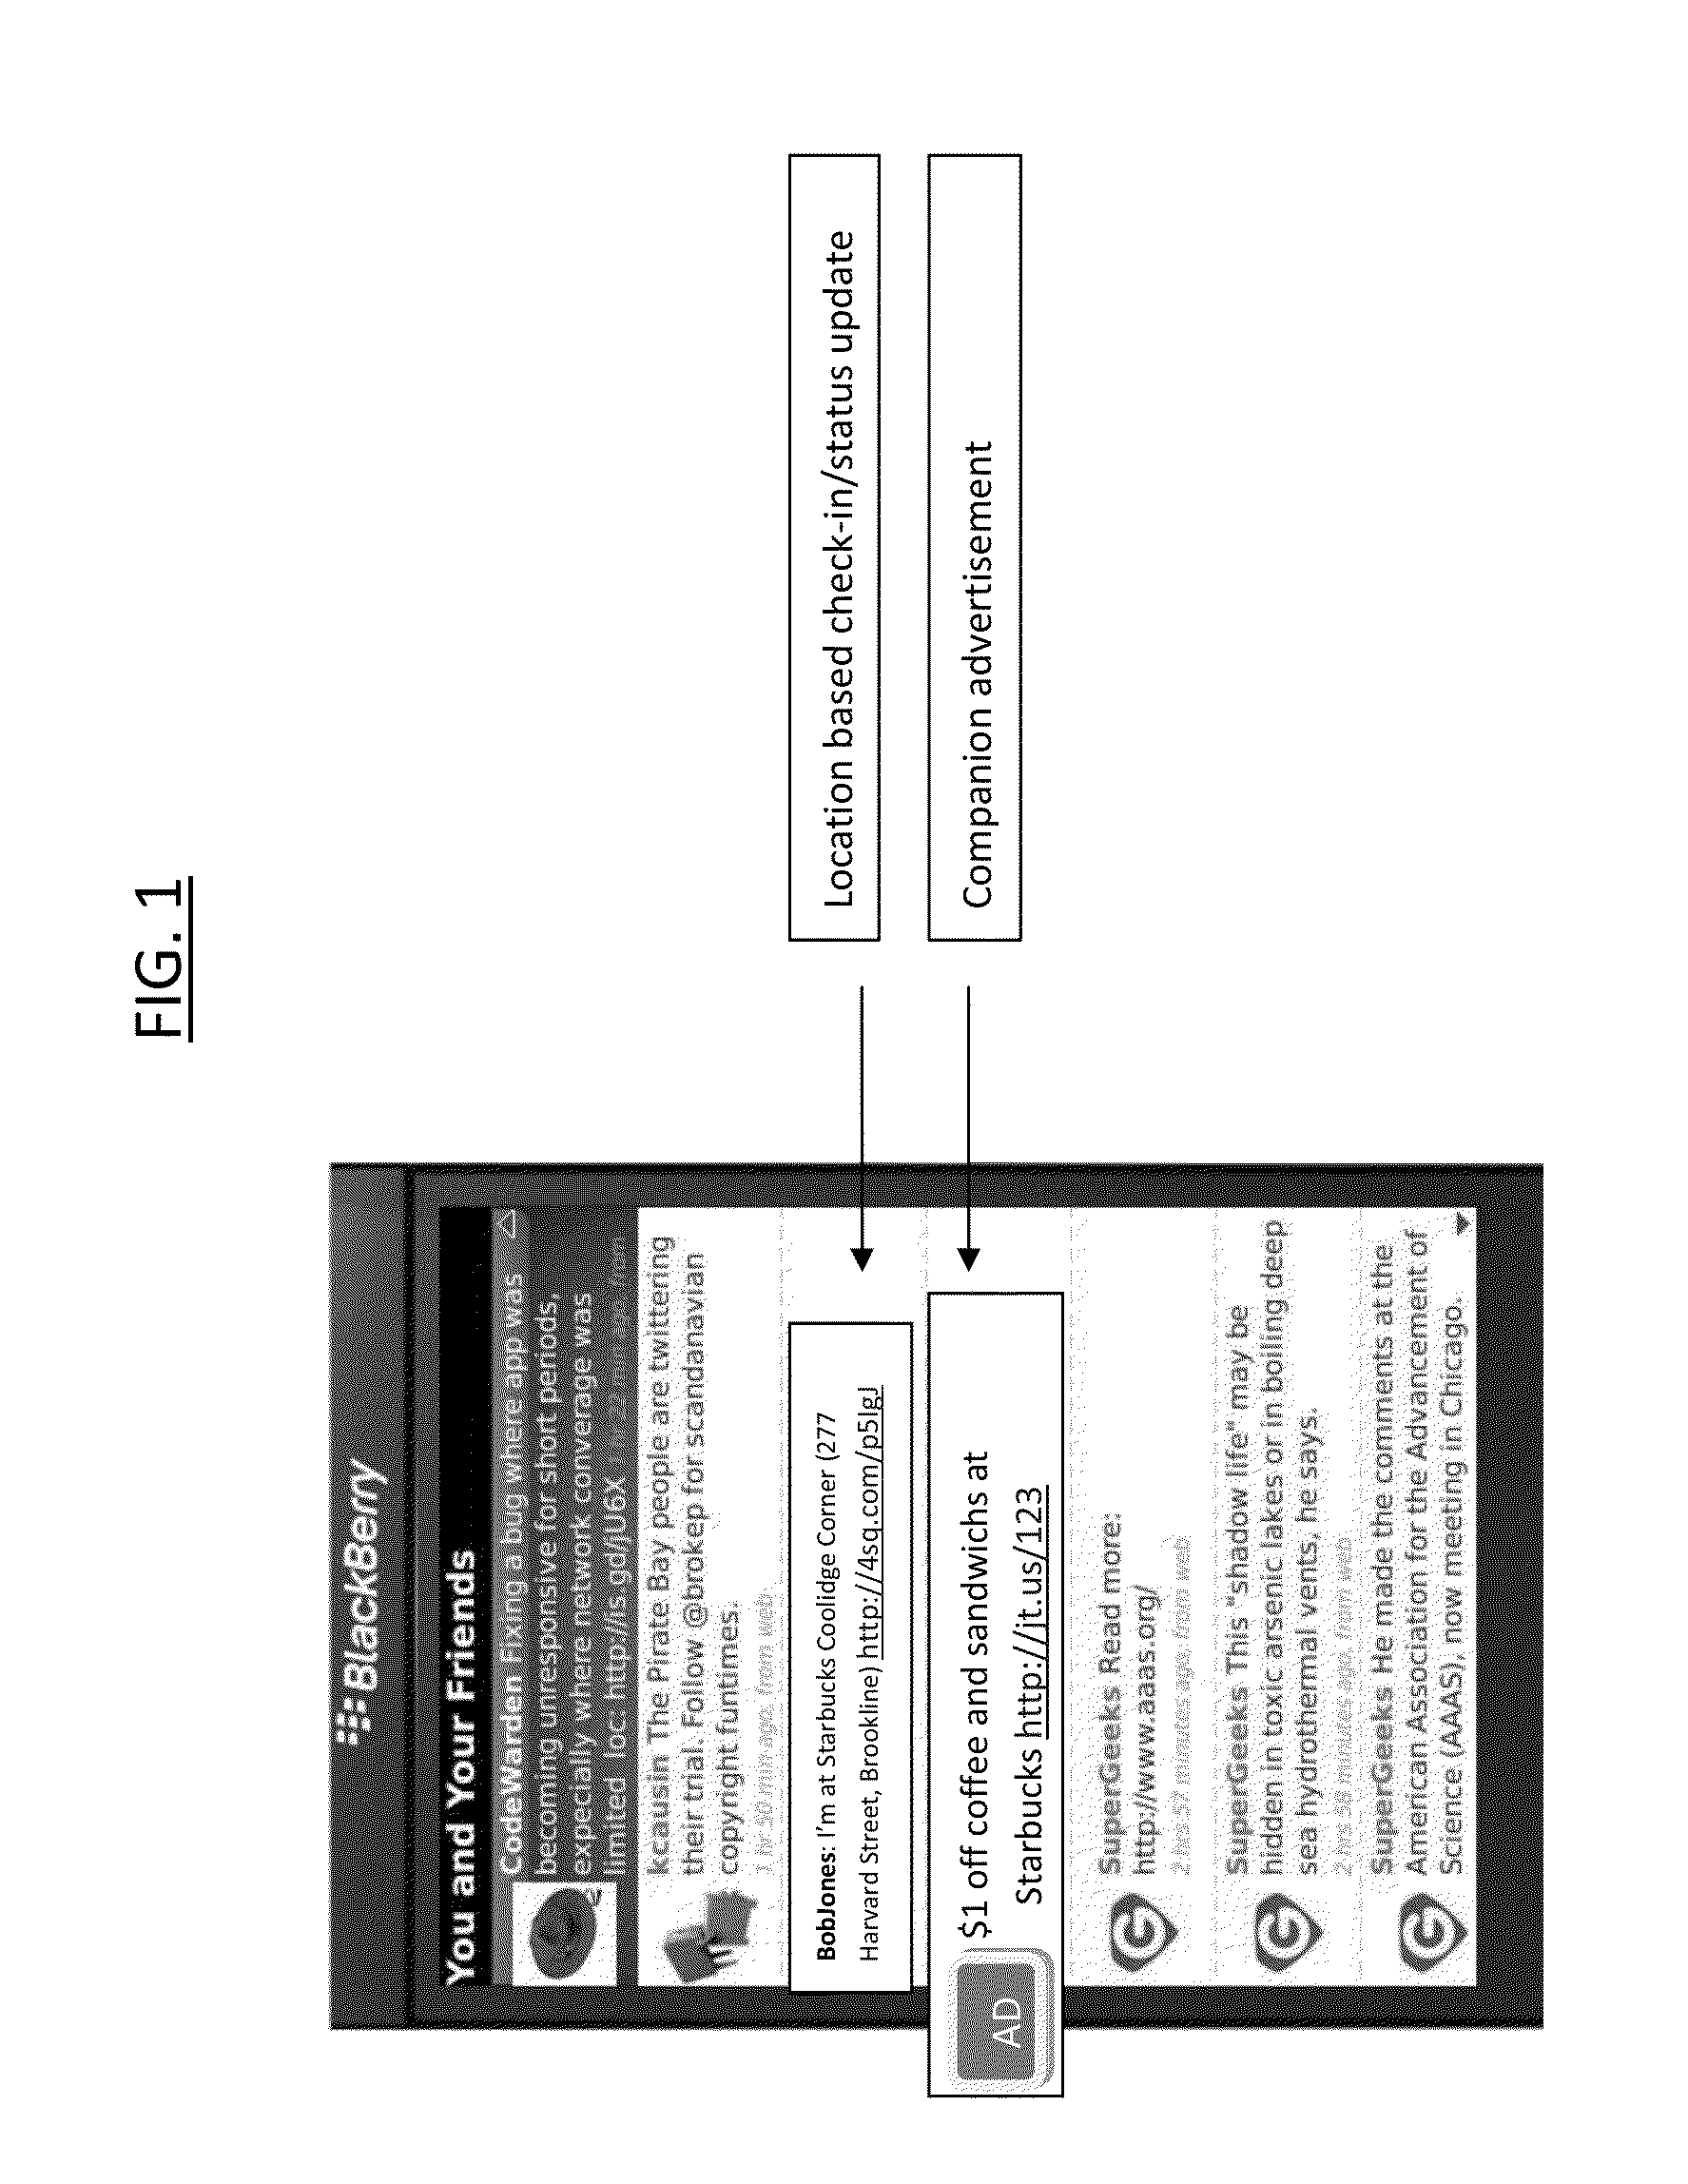 System for determining interests of users of mobile and nonmobile communication devices based on data received from a plurality of data providers